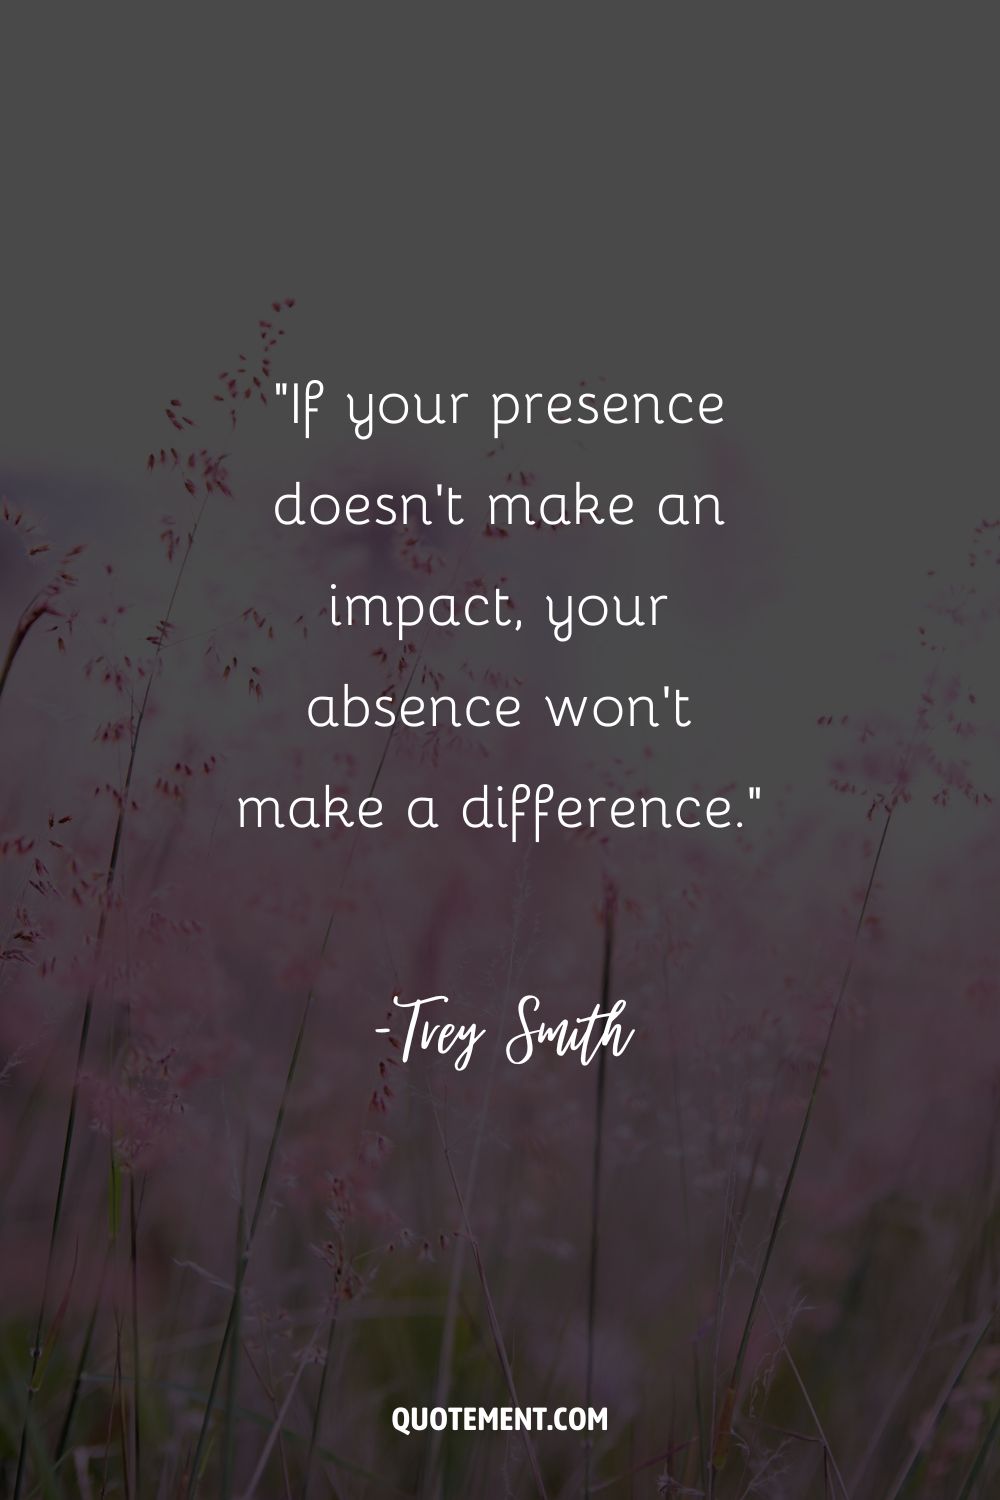 pink small flowers representing you can make a difference quote